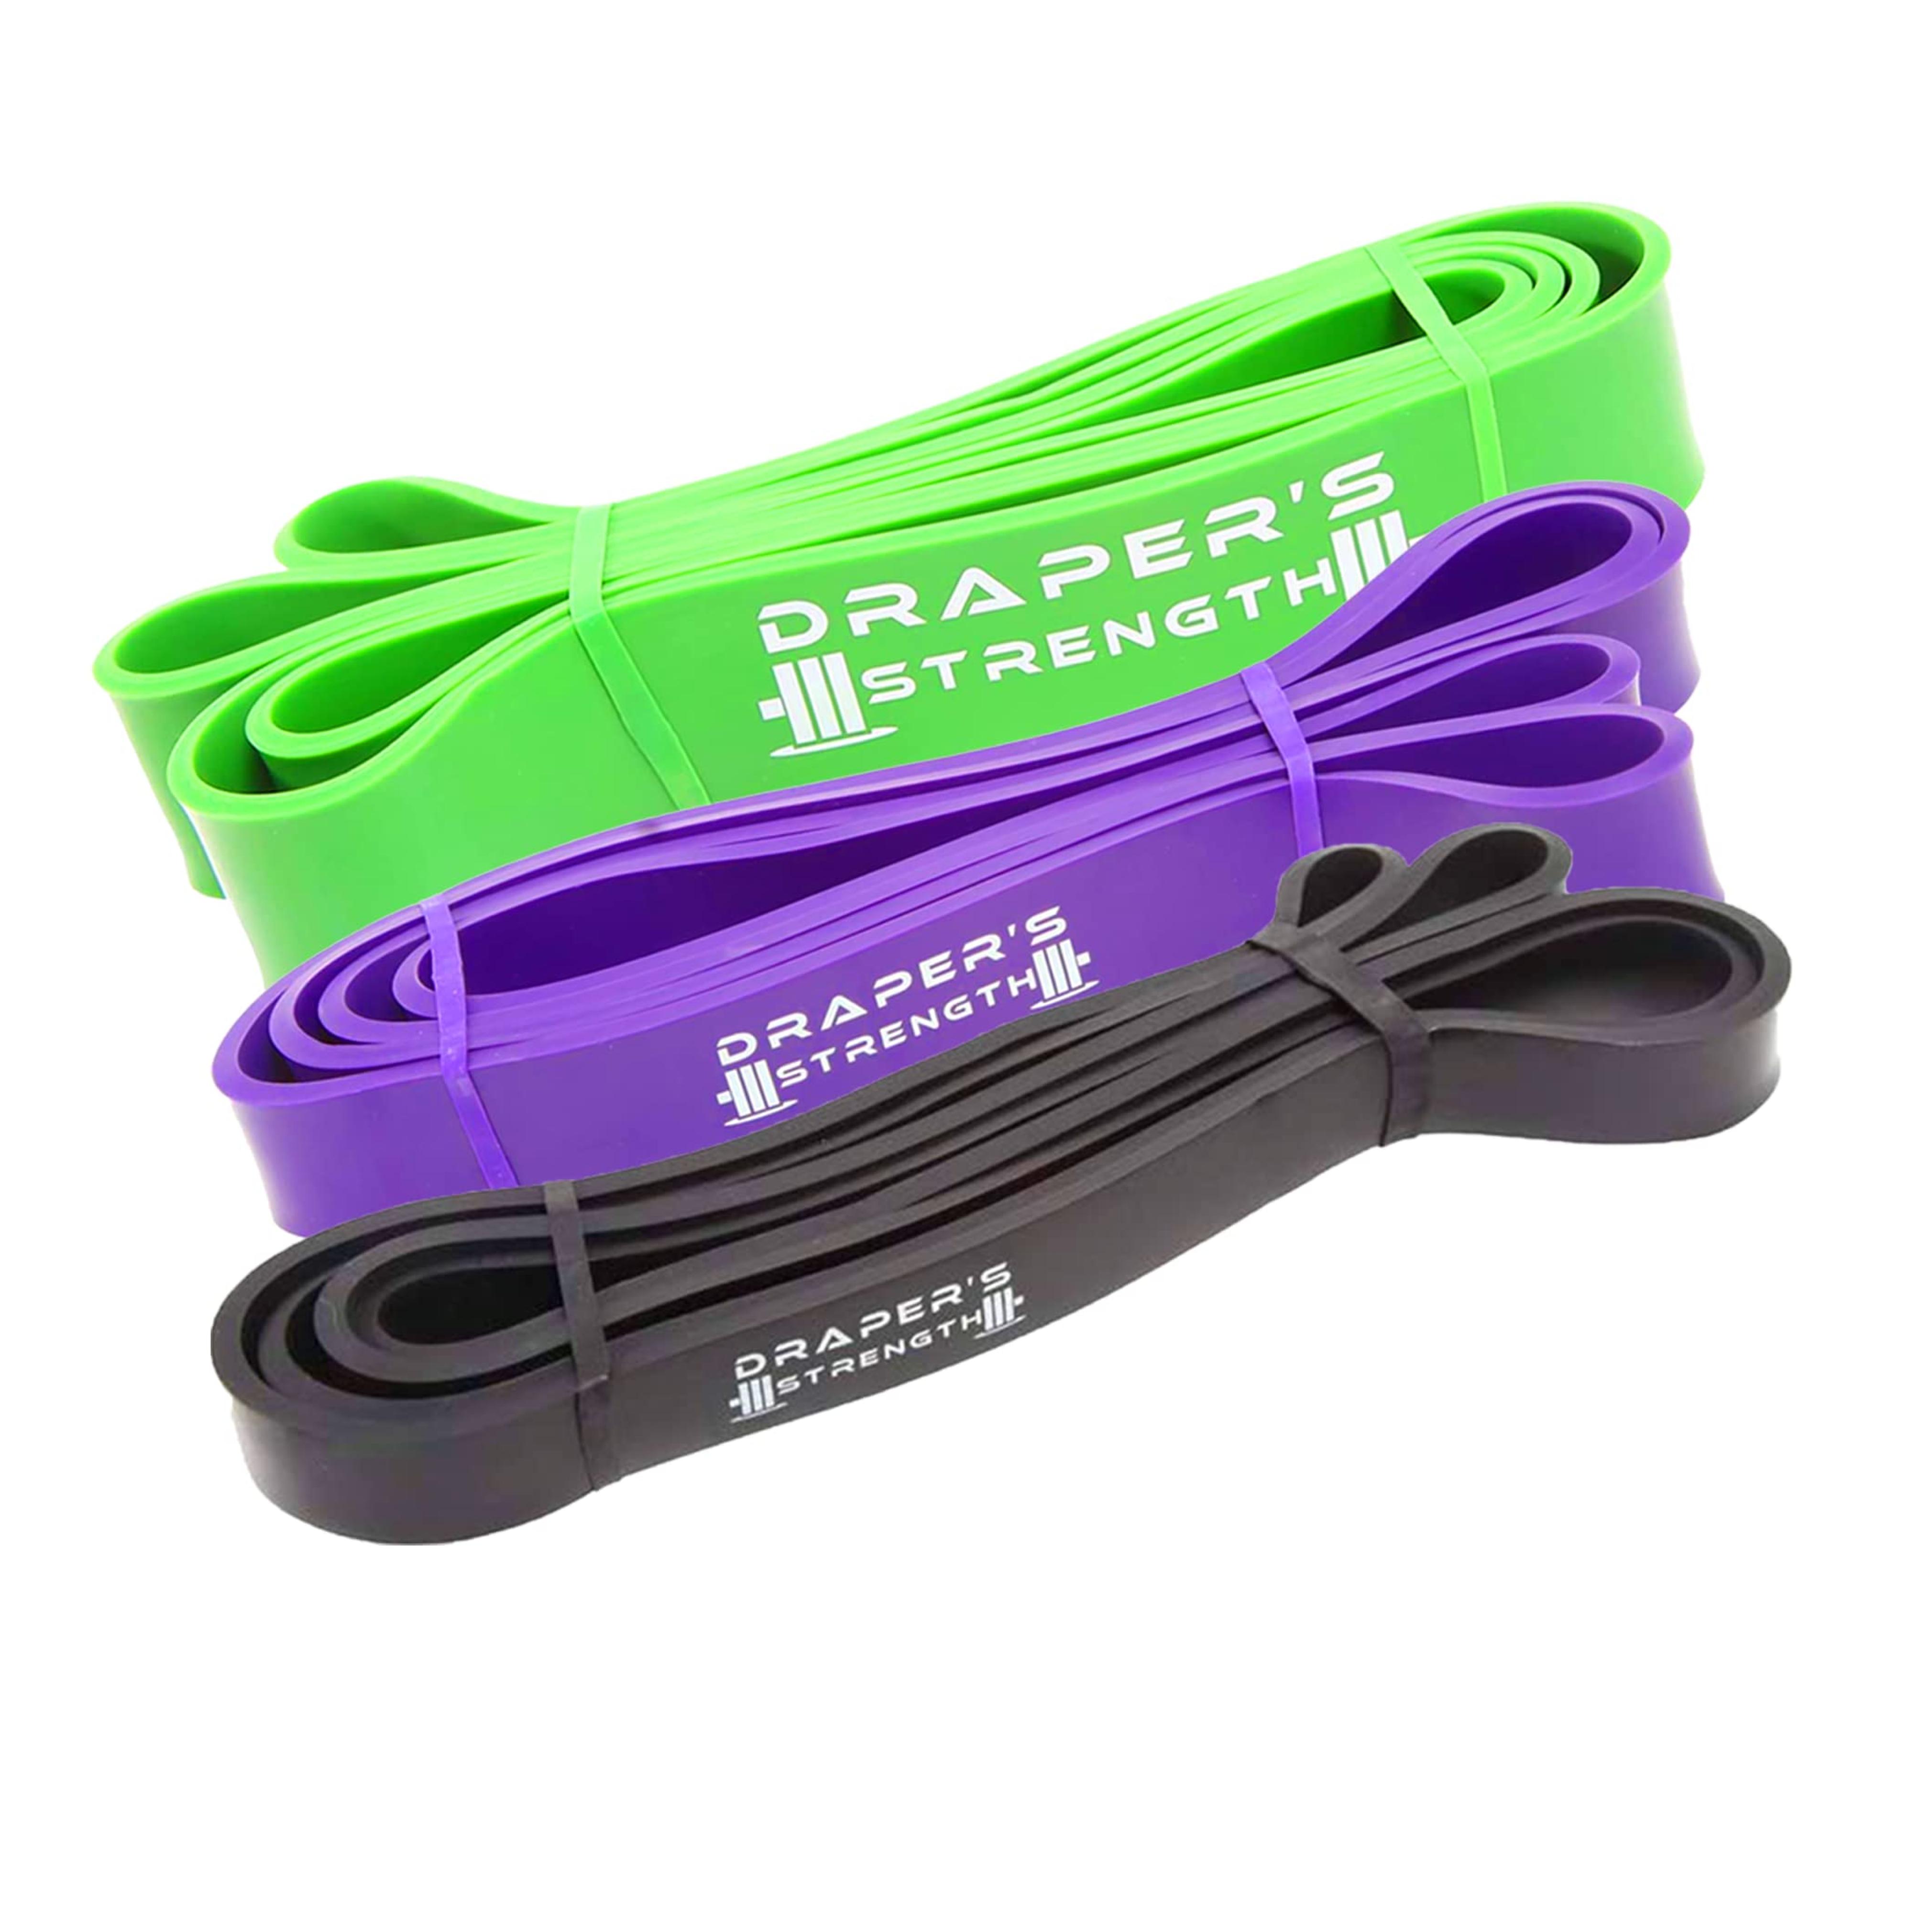 Amazon.com: DRAPER'S STRENGTH Heavy Duty Resistance Stretch Loop Bands for Powerlifting Workout Exercise and Assisted Pull Ups (#10 3 Band Set Black-Green) : Sports & Outdoors